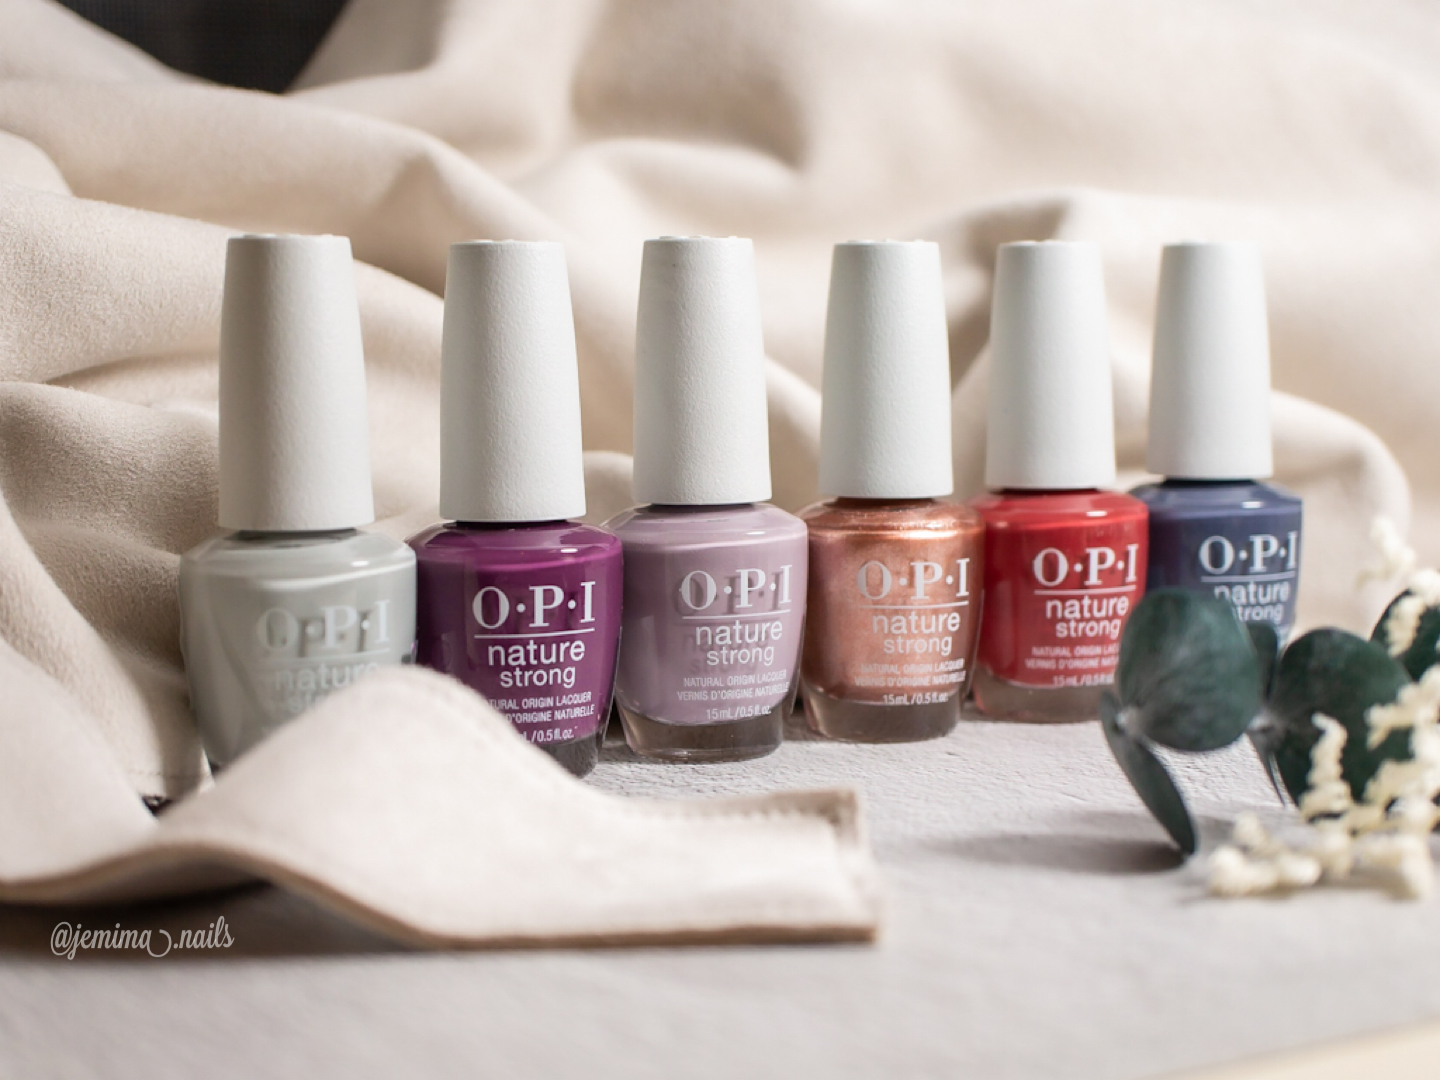 Can OPI's new repair mode strengthen my nails in two weeks? - BeautyEQ